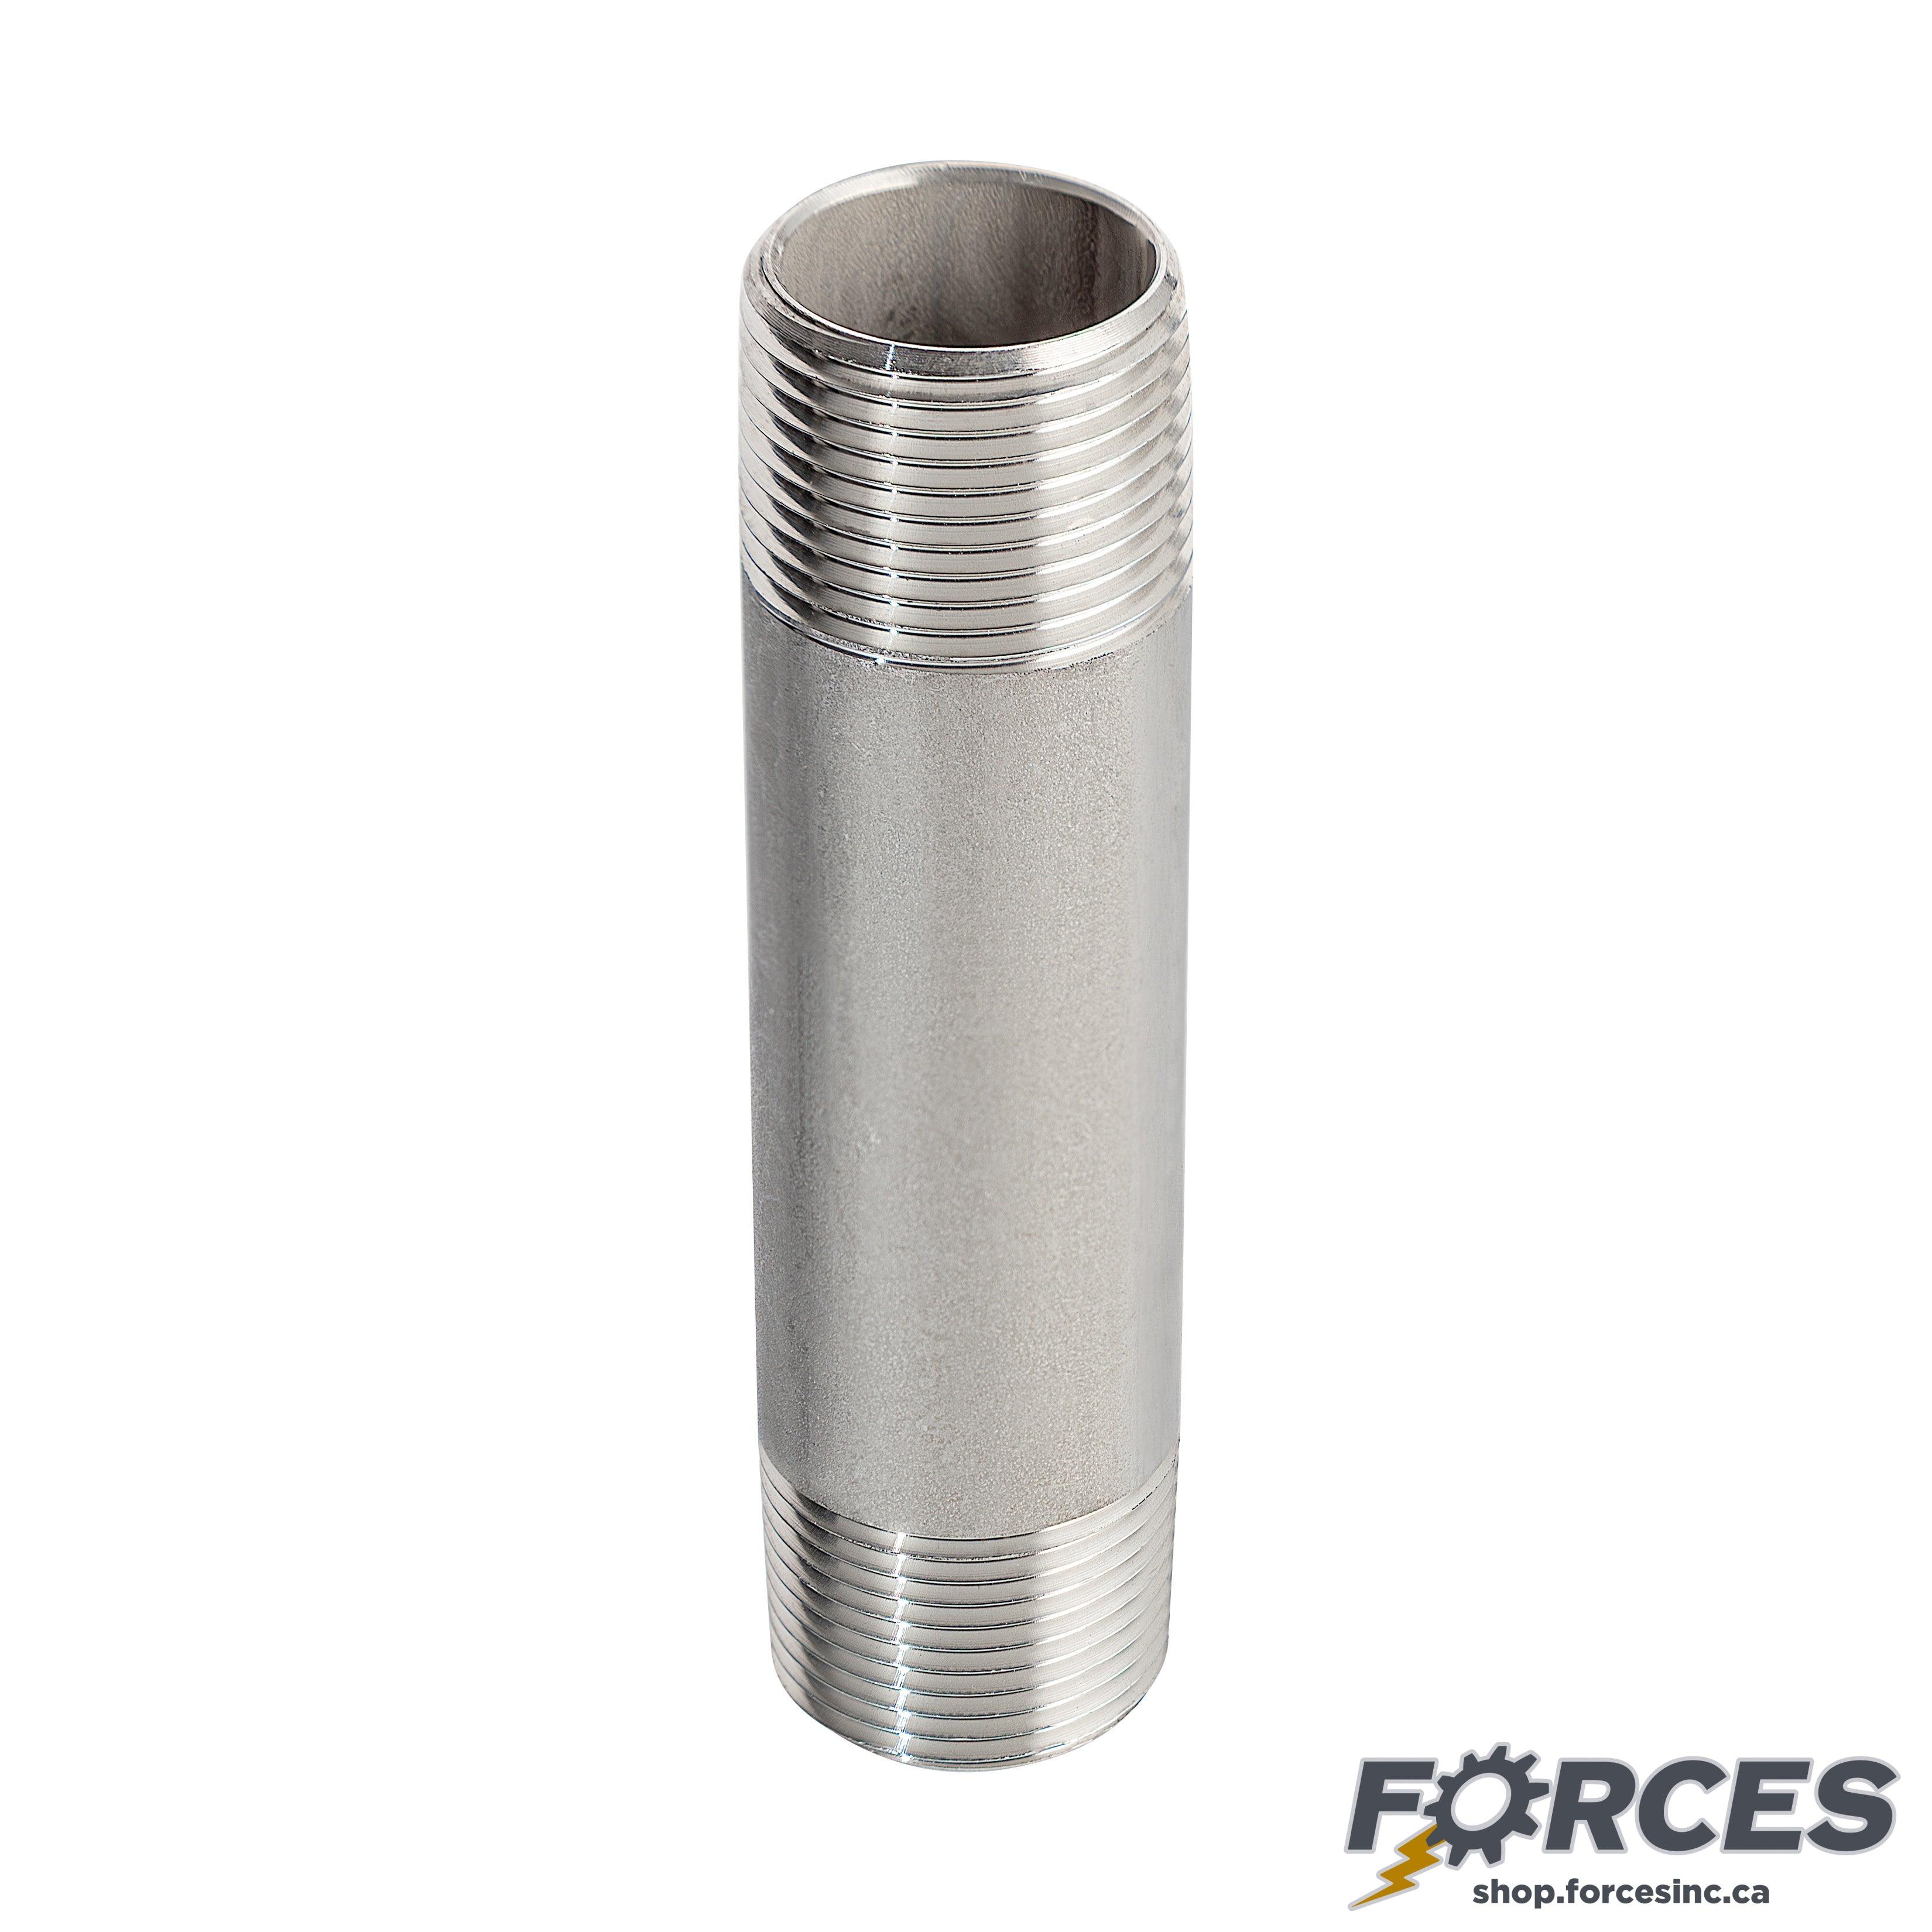 3/8" X 3" Long Nipple - Stainless Steel 316 - Forces Inc